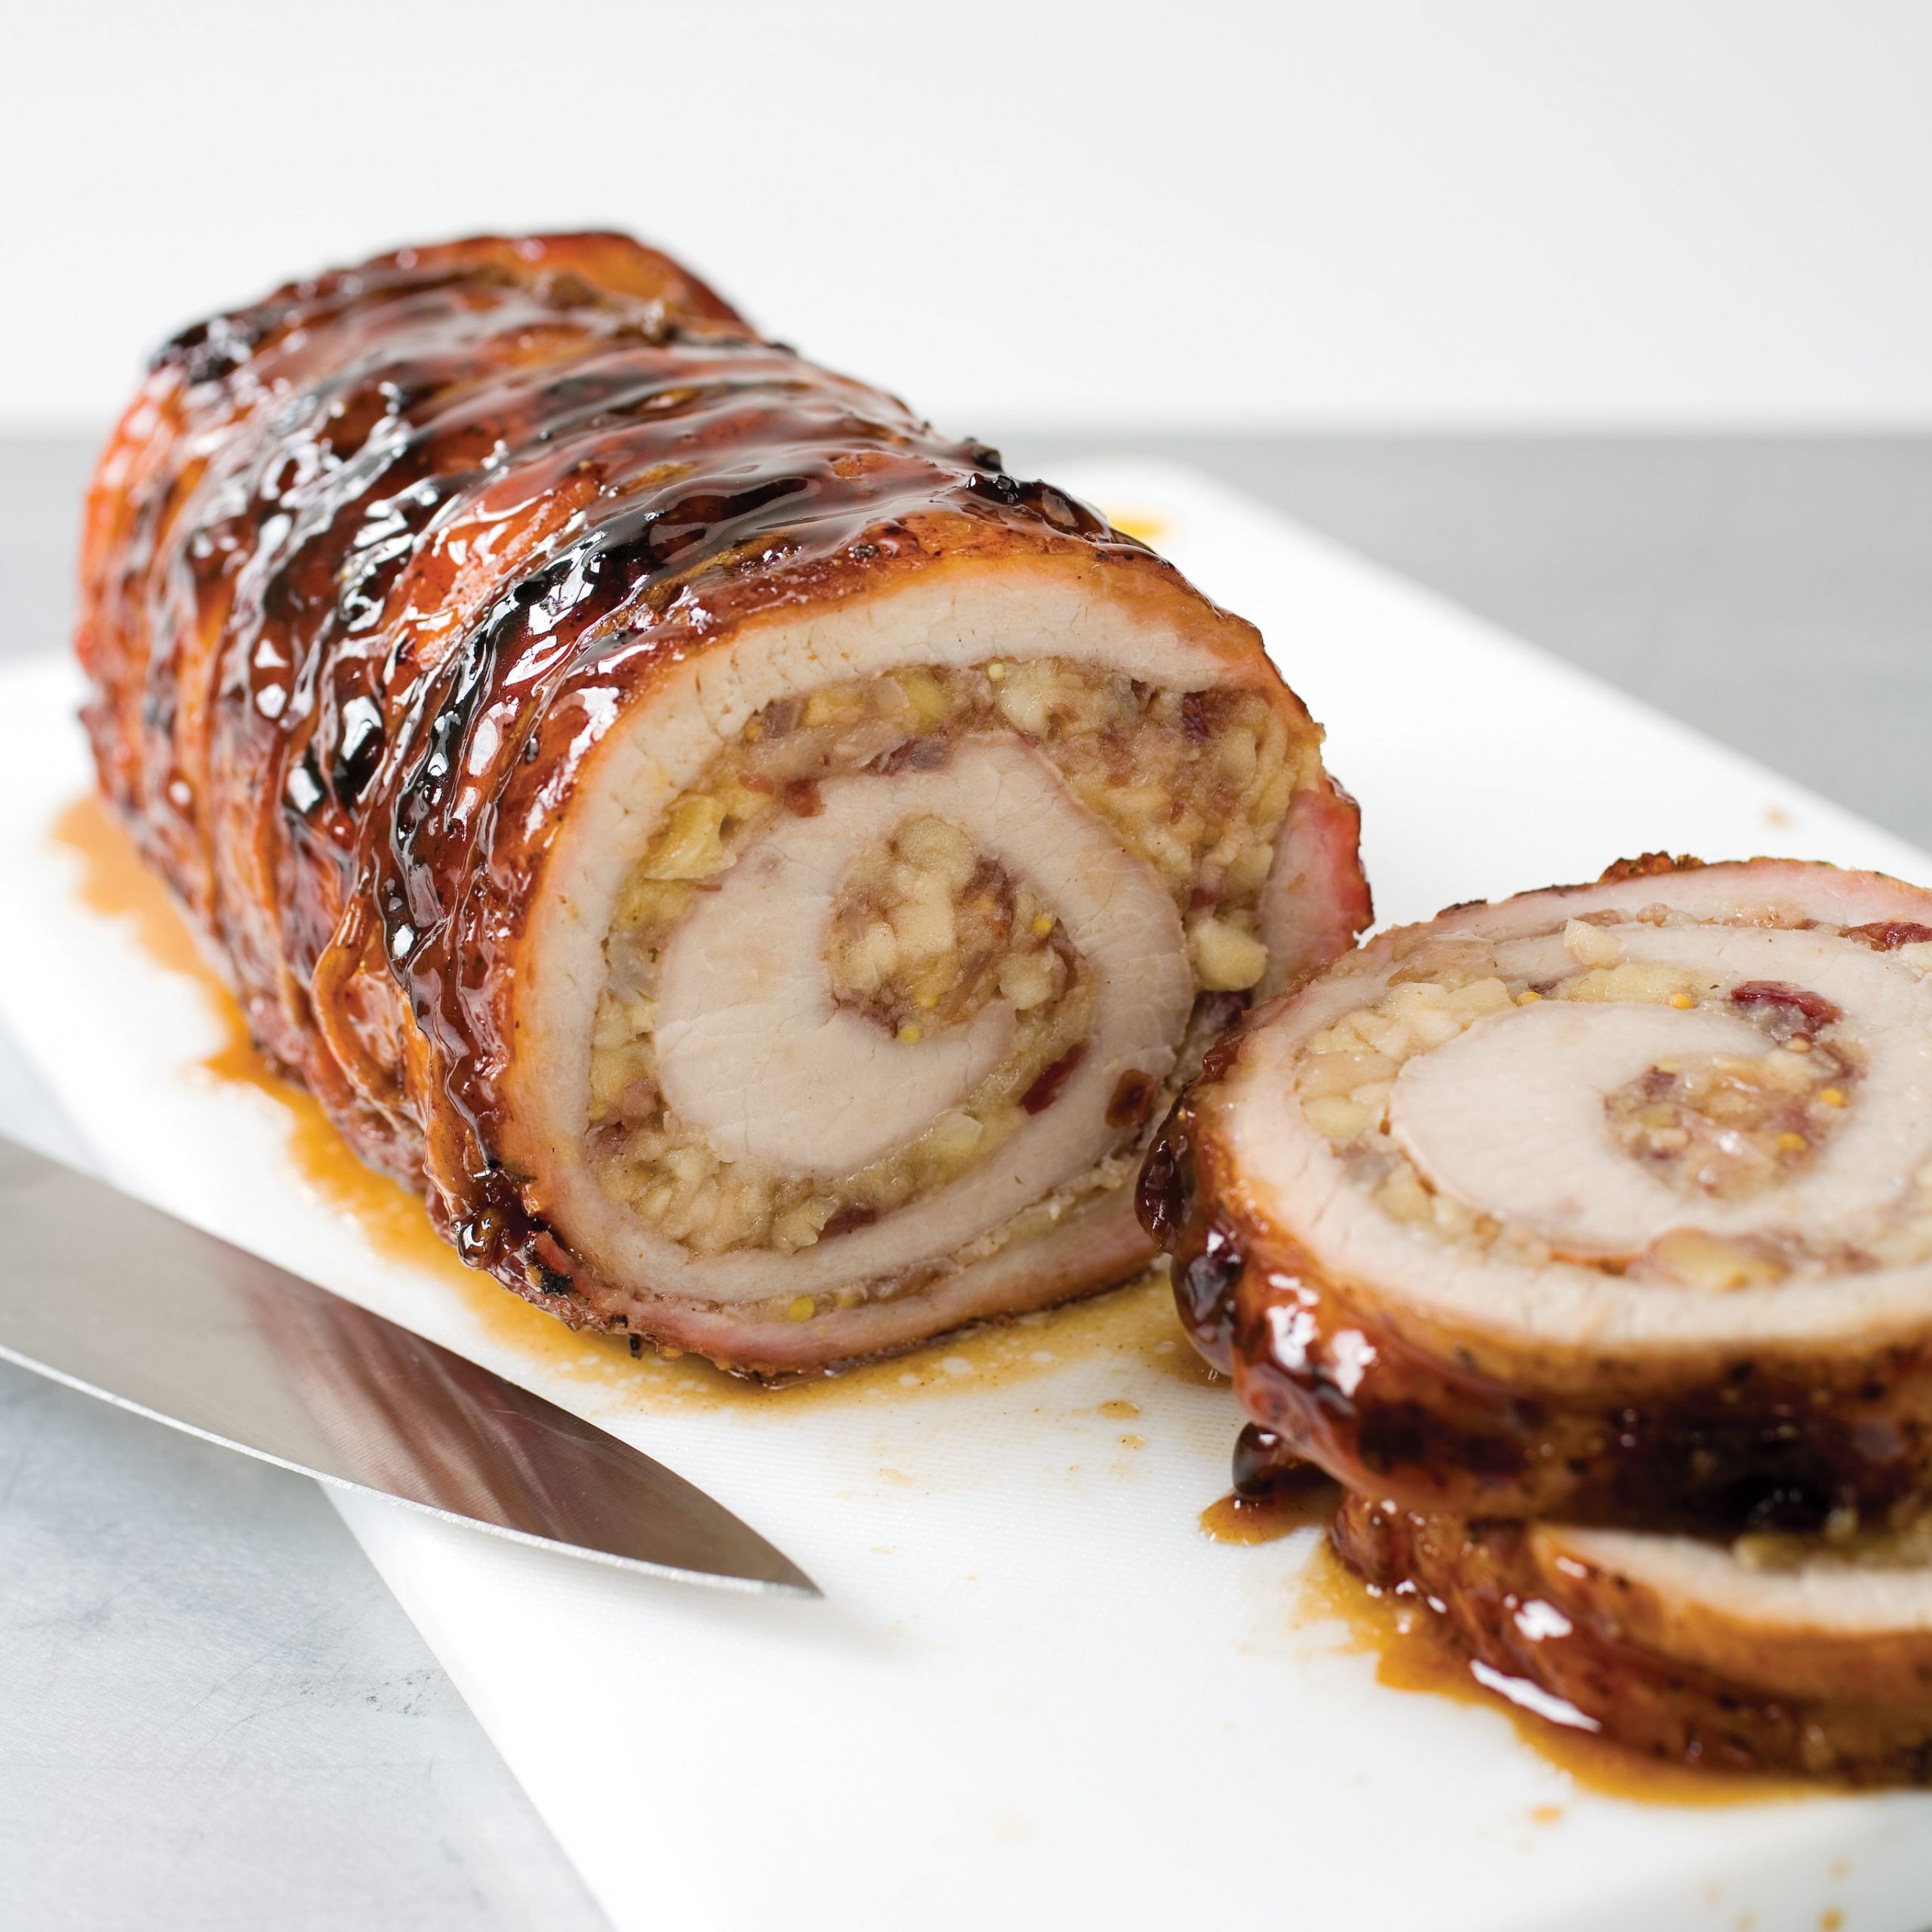 Grilled Pork Loin Recipe
 Grilled Pork Loin with Apple Cranberry Filling on a